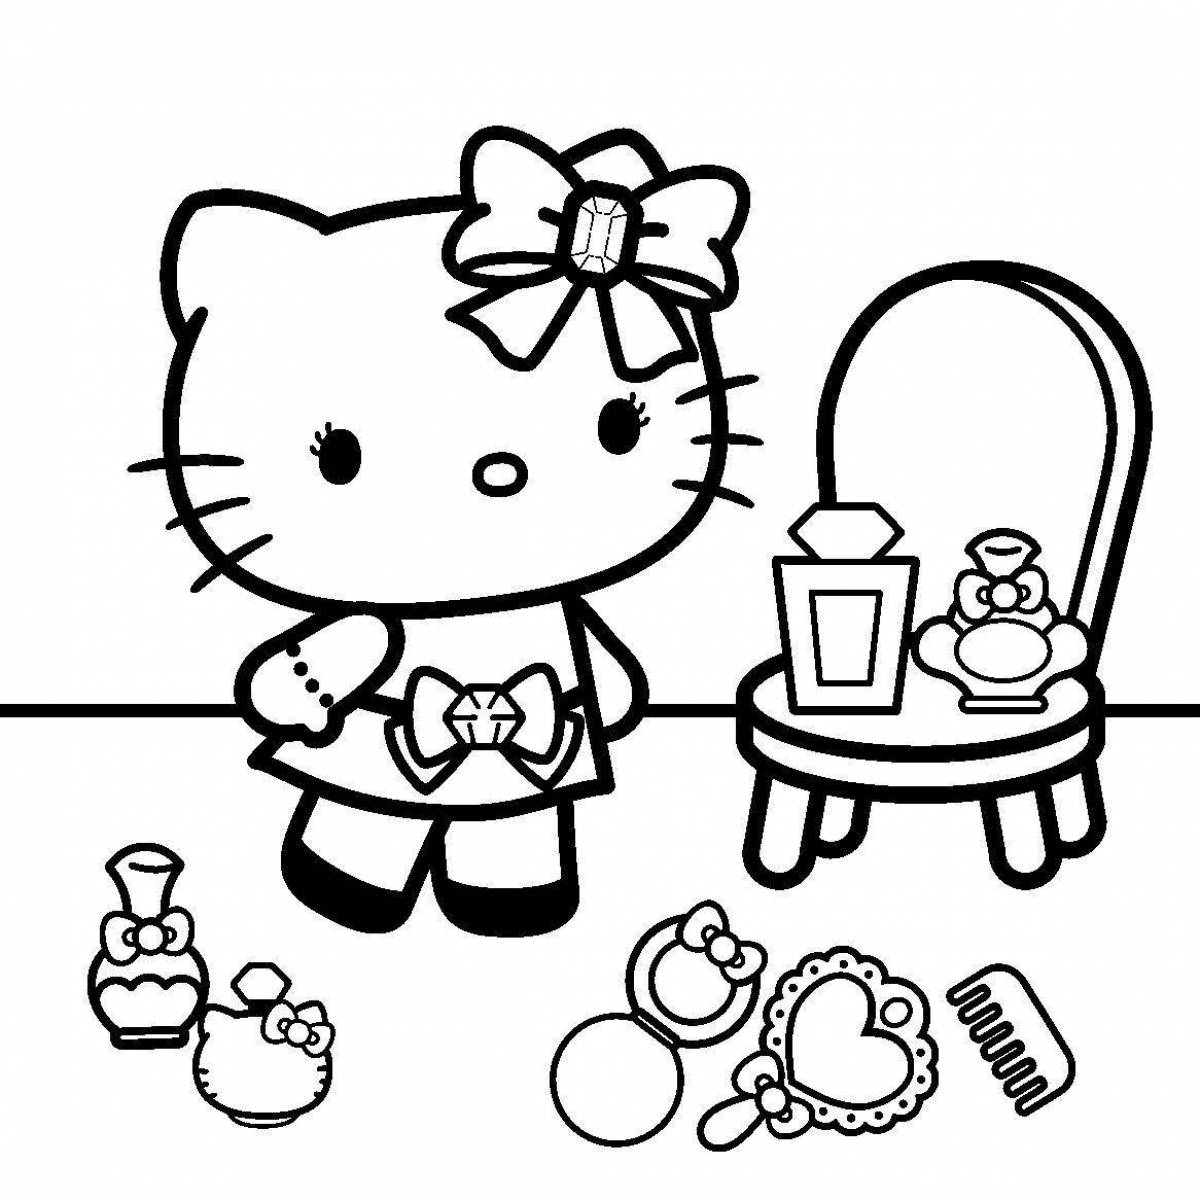 Melody kitty's blissful coloring book